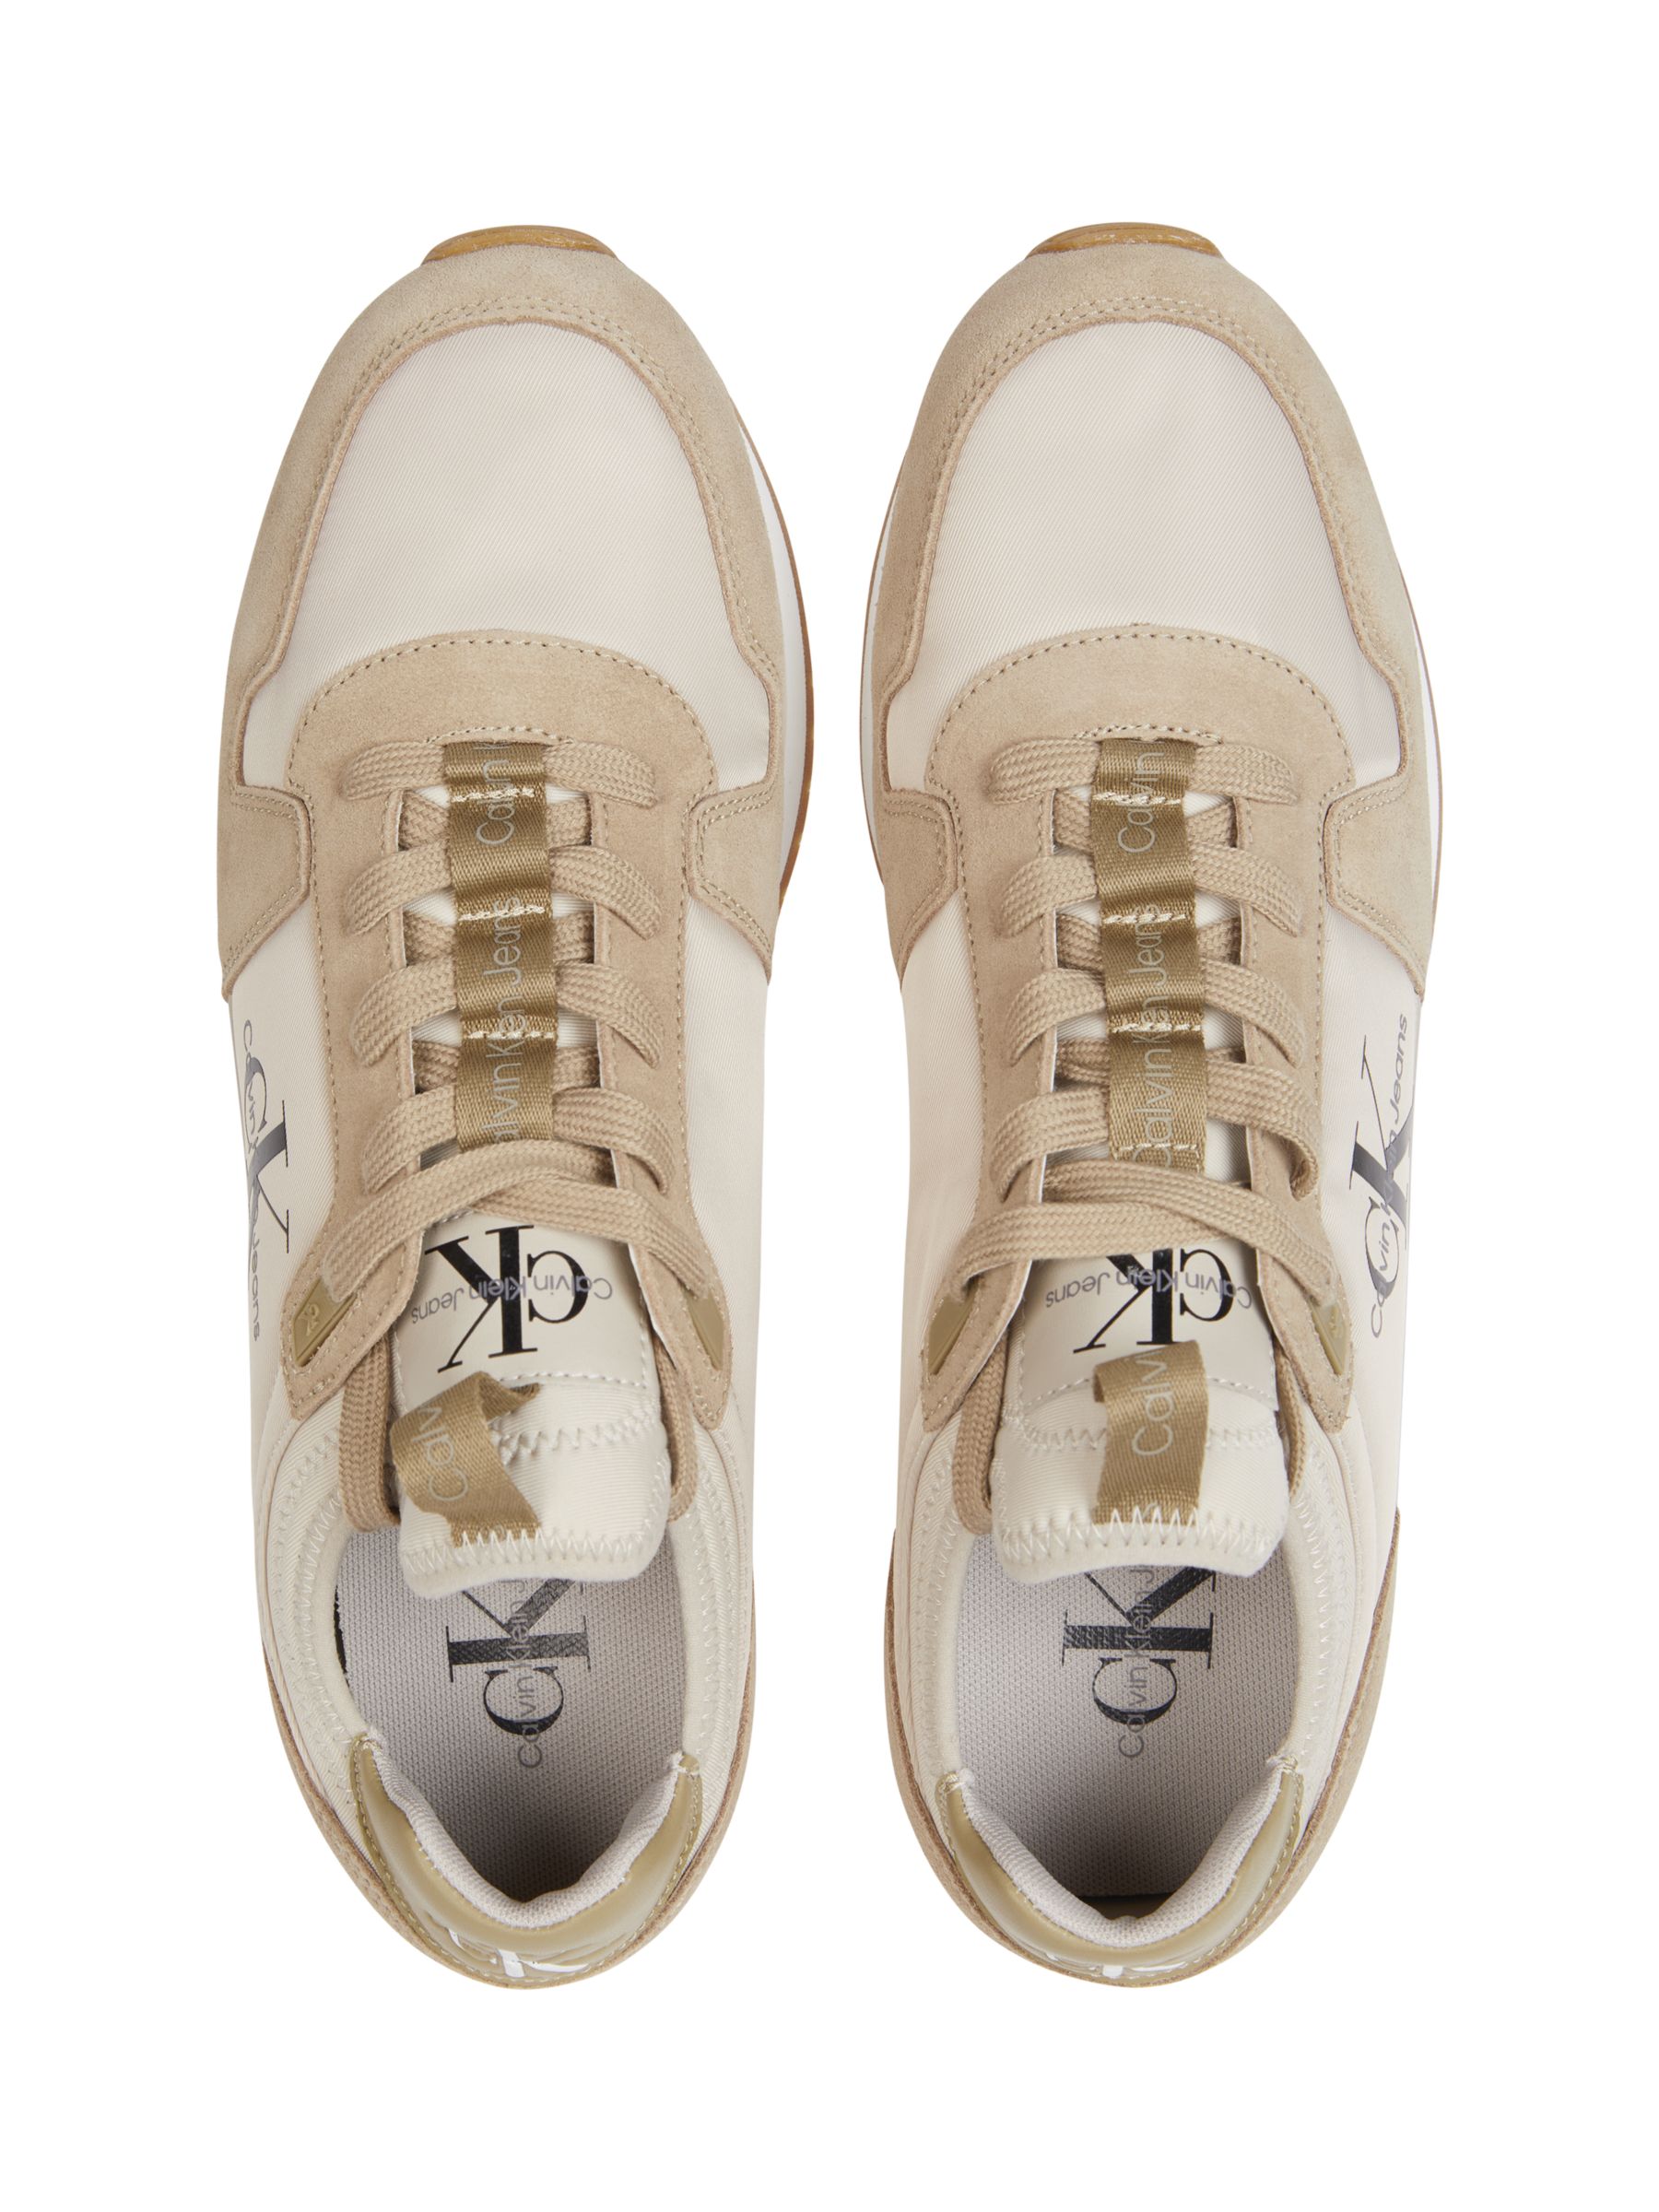 Calvin Klein Suede Lace Up Runner Trainers, Eggshell/Travertine, 6